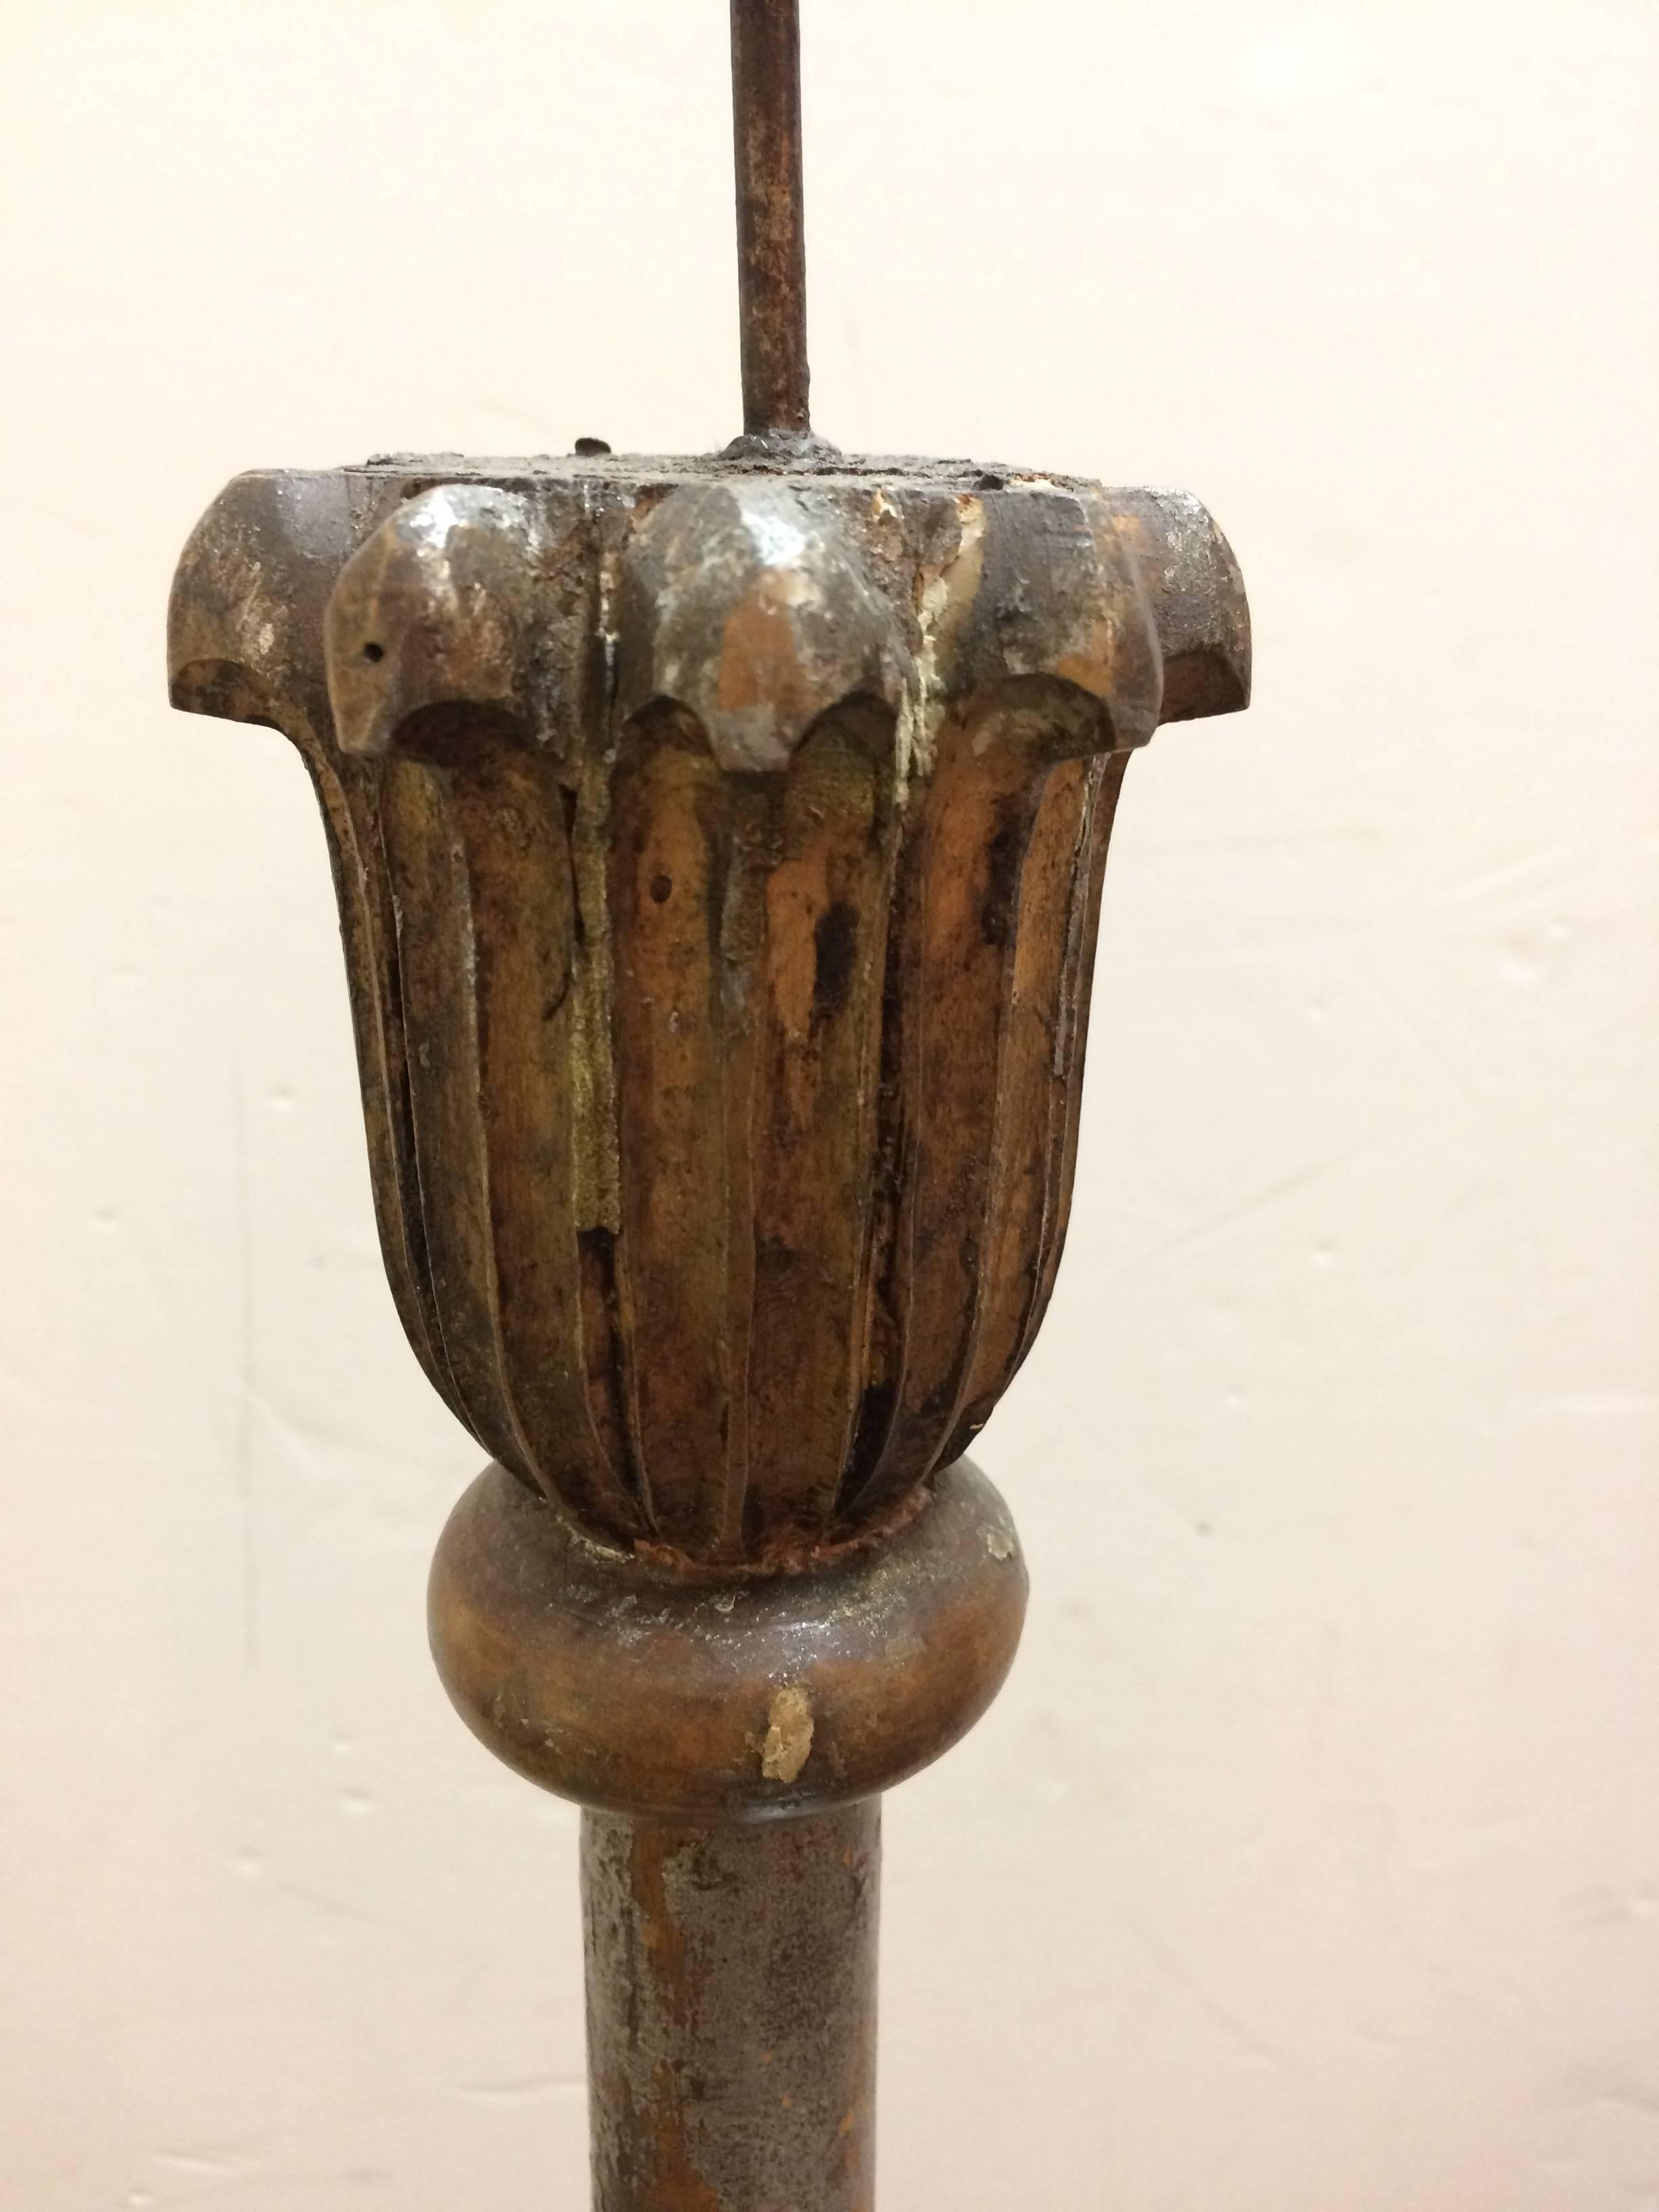 Wonderful pair of French carved wood candlesticks with a yummy silverleaf distressed patina.